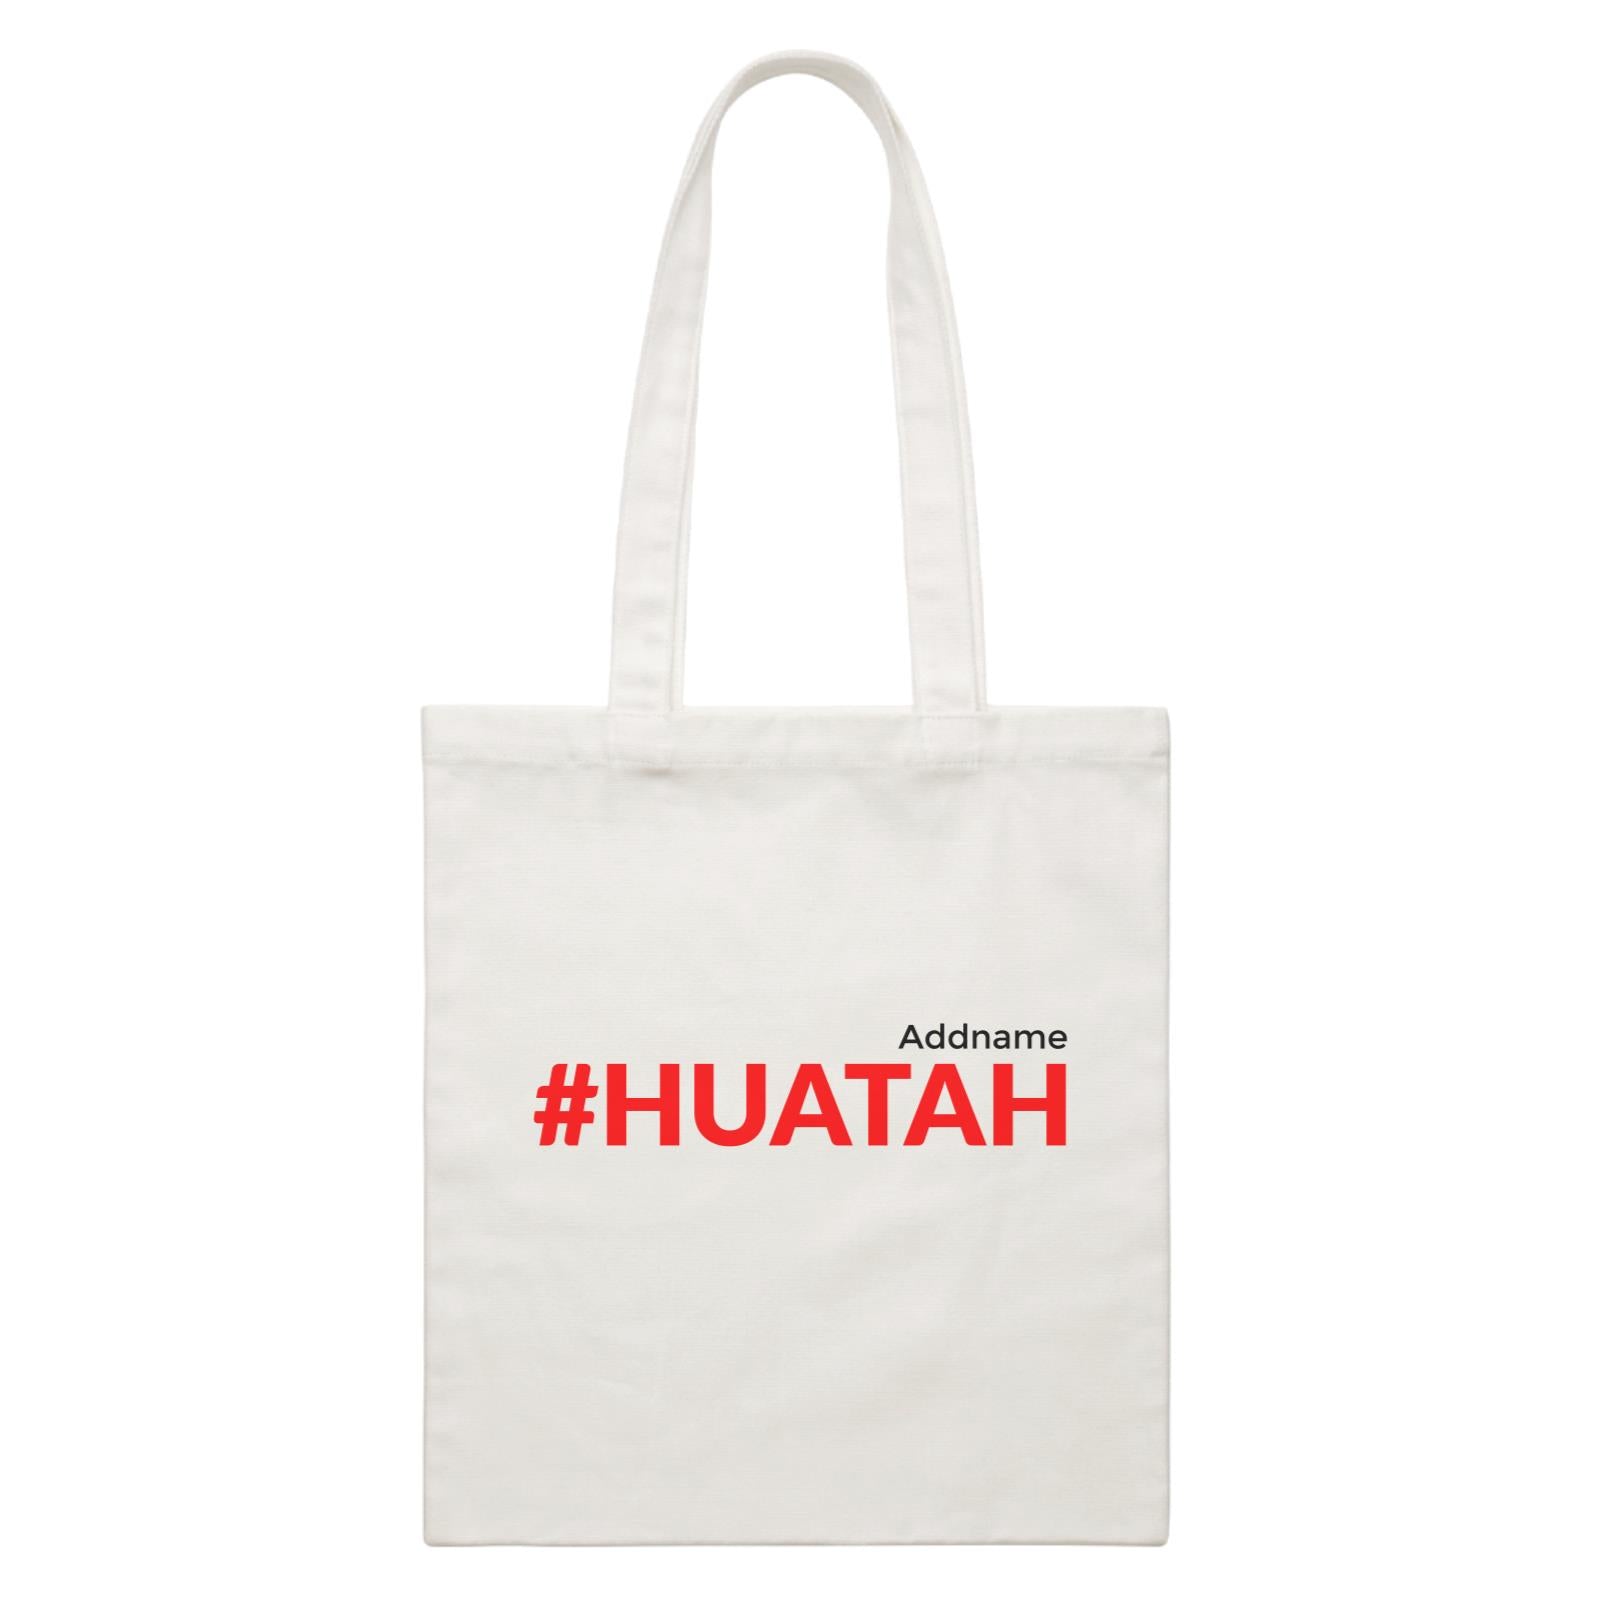 Chinese New Year Hashtag Huatah Accessories Canvas Bag